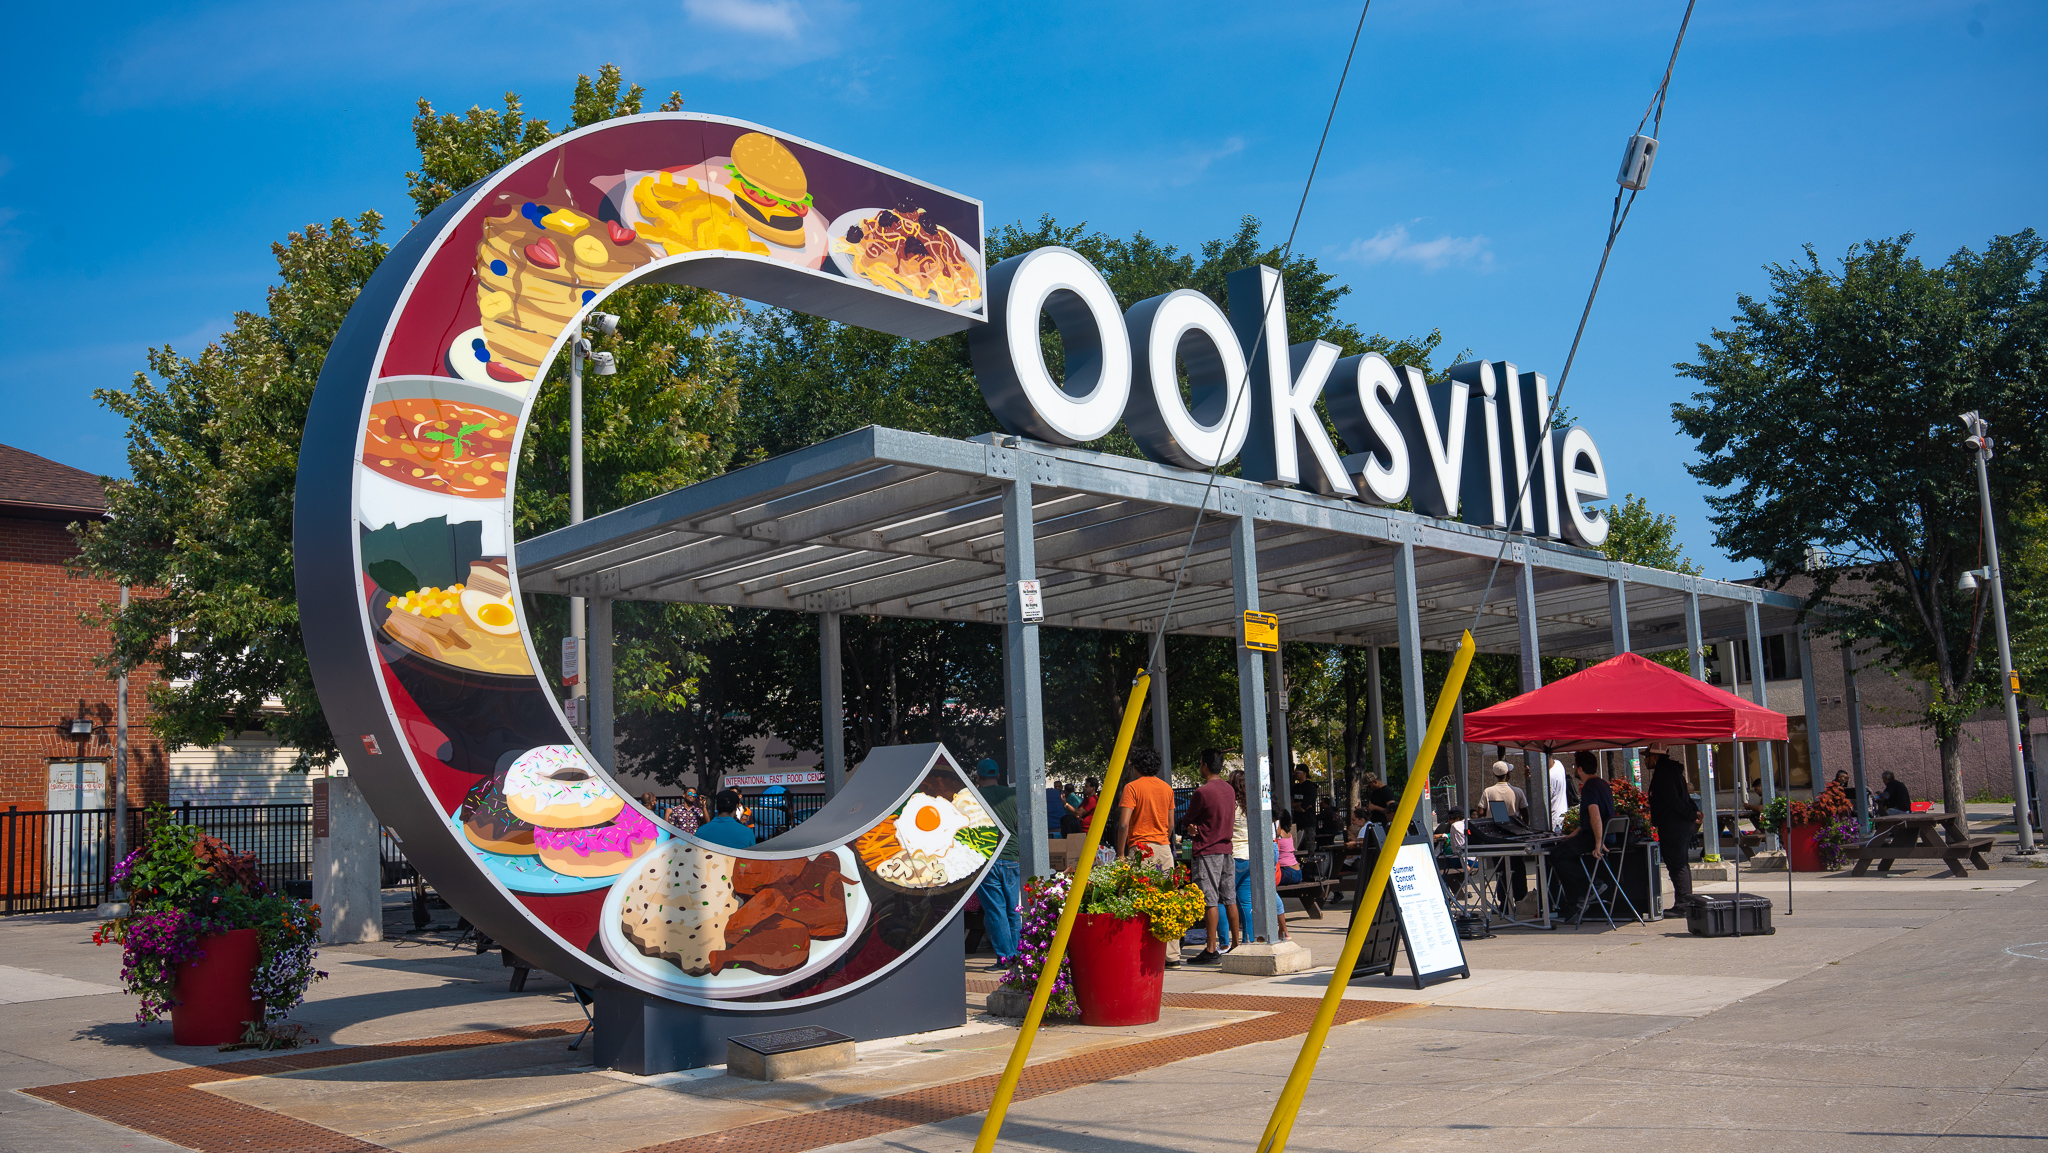 Photograph of the Cooksville sign with a food illustration by Ashley Mozo in the 'C'.